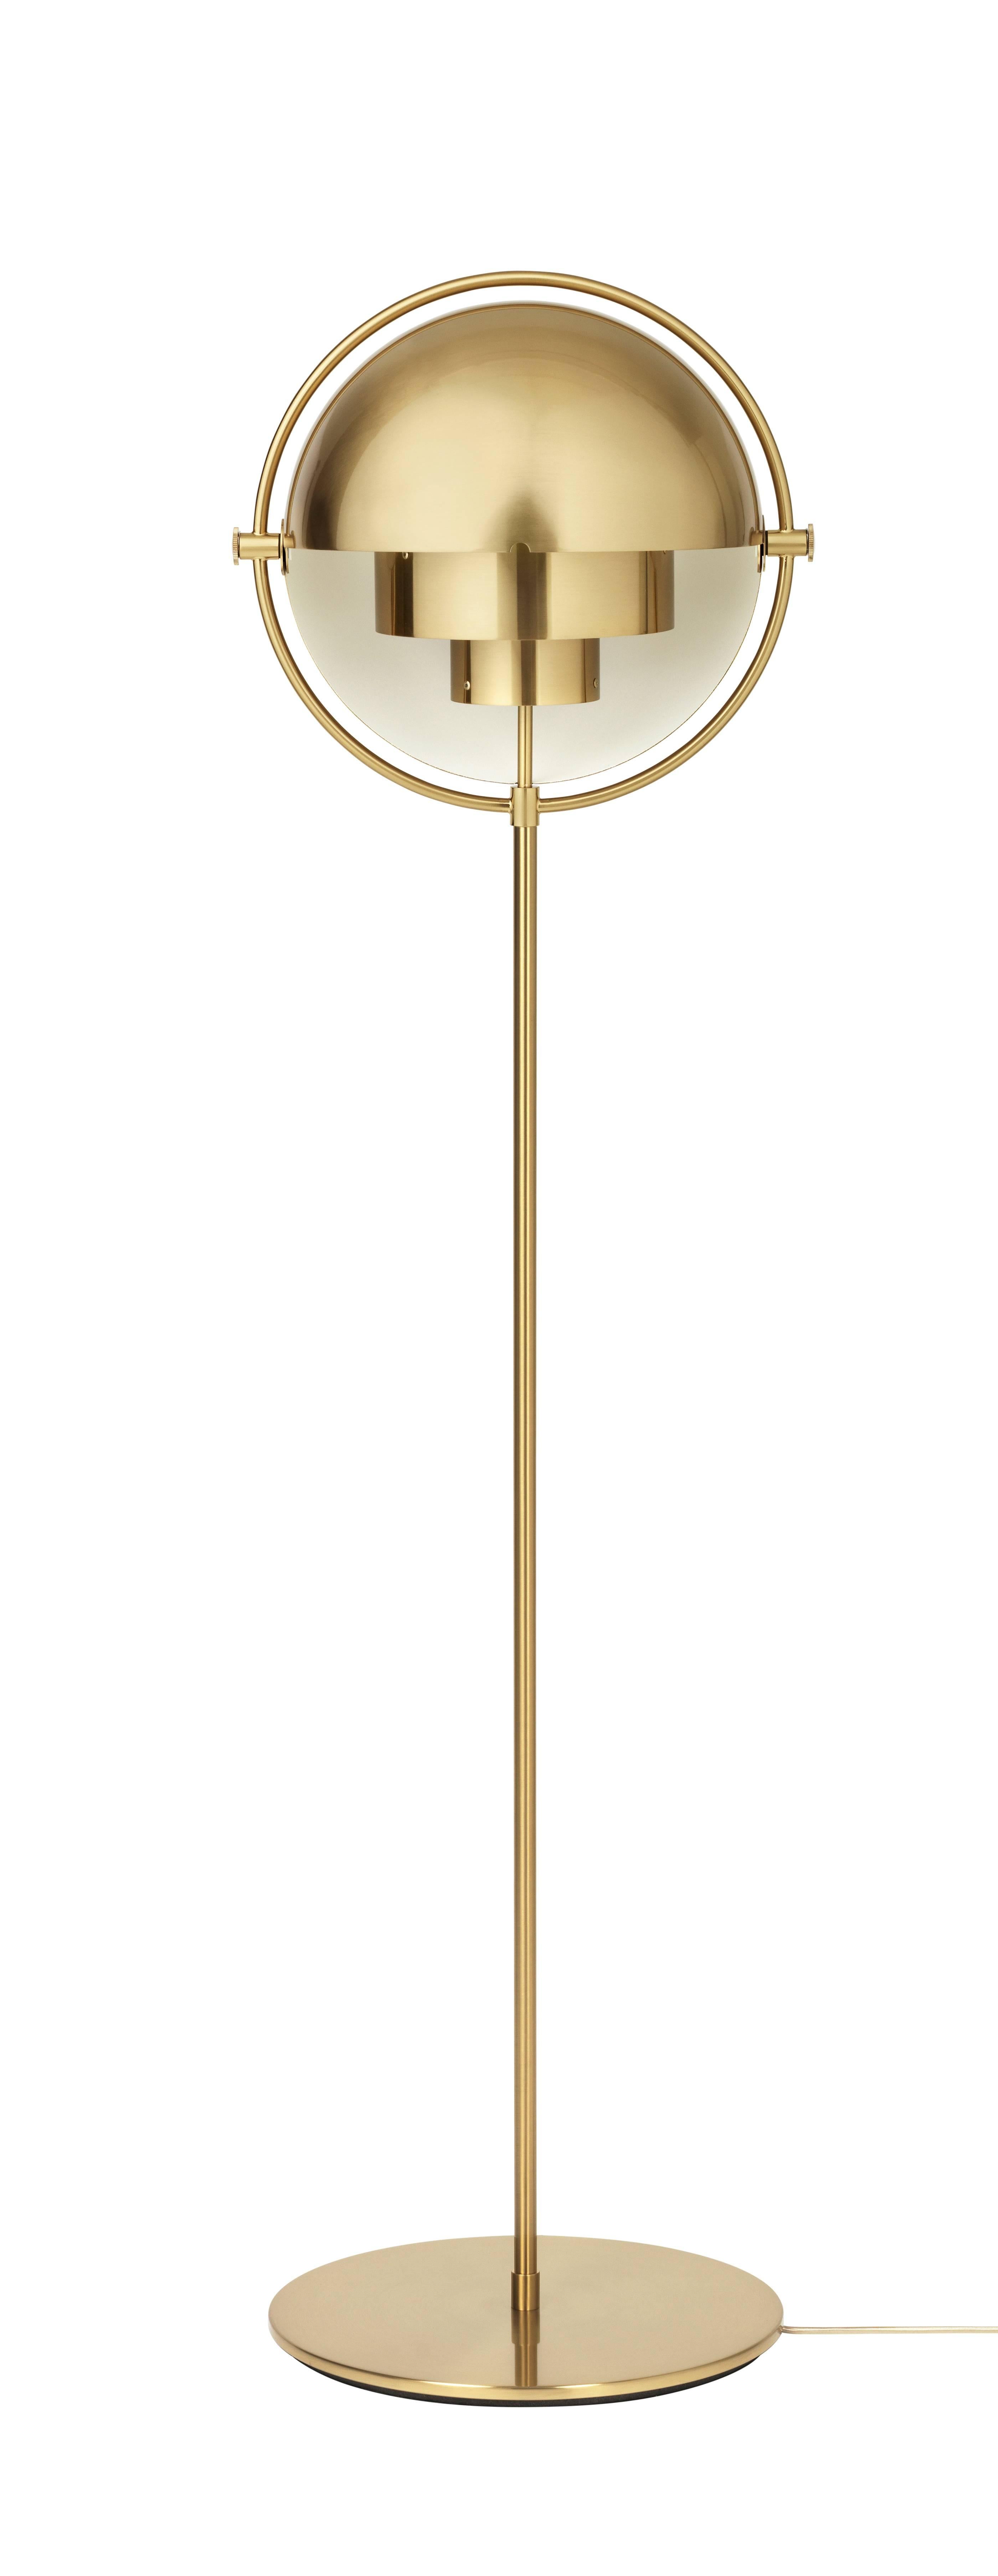 Louis Weisdorf 'Multi-Lite' floor lamp in brass. Designed in 1972 by Weisdorf, this is an authorized re-edition by GUBI of Denmark who meticulously reproduces his work with scrupulous attention to detail and materials that are faithful to the